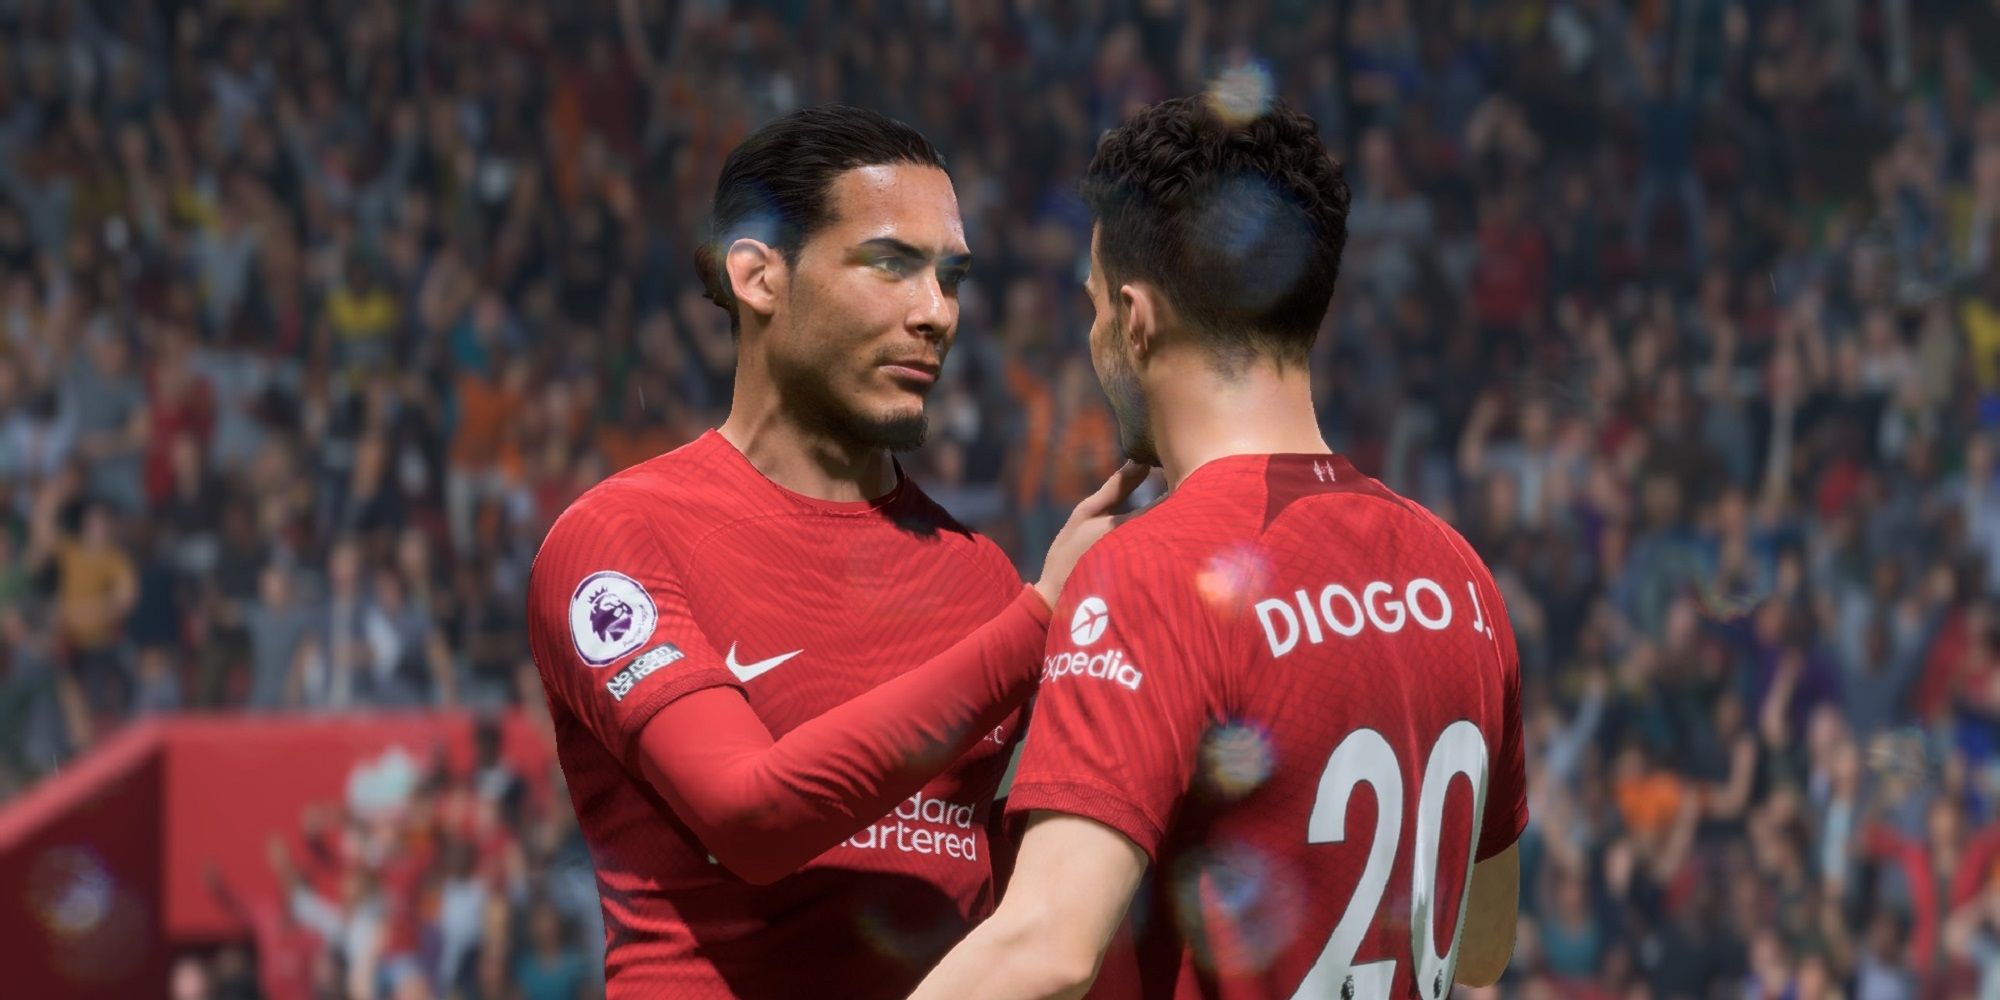 FIFA 23 two players embrace on pitch